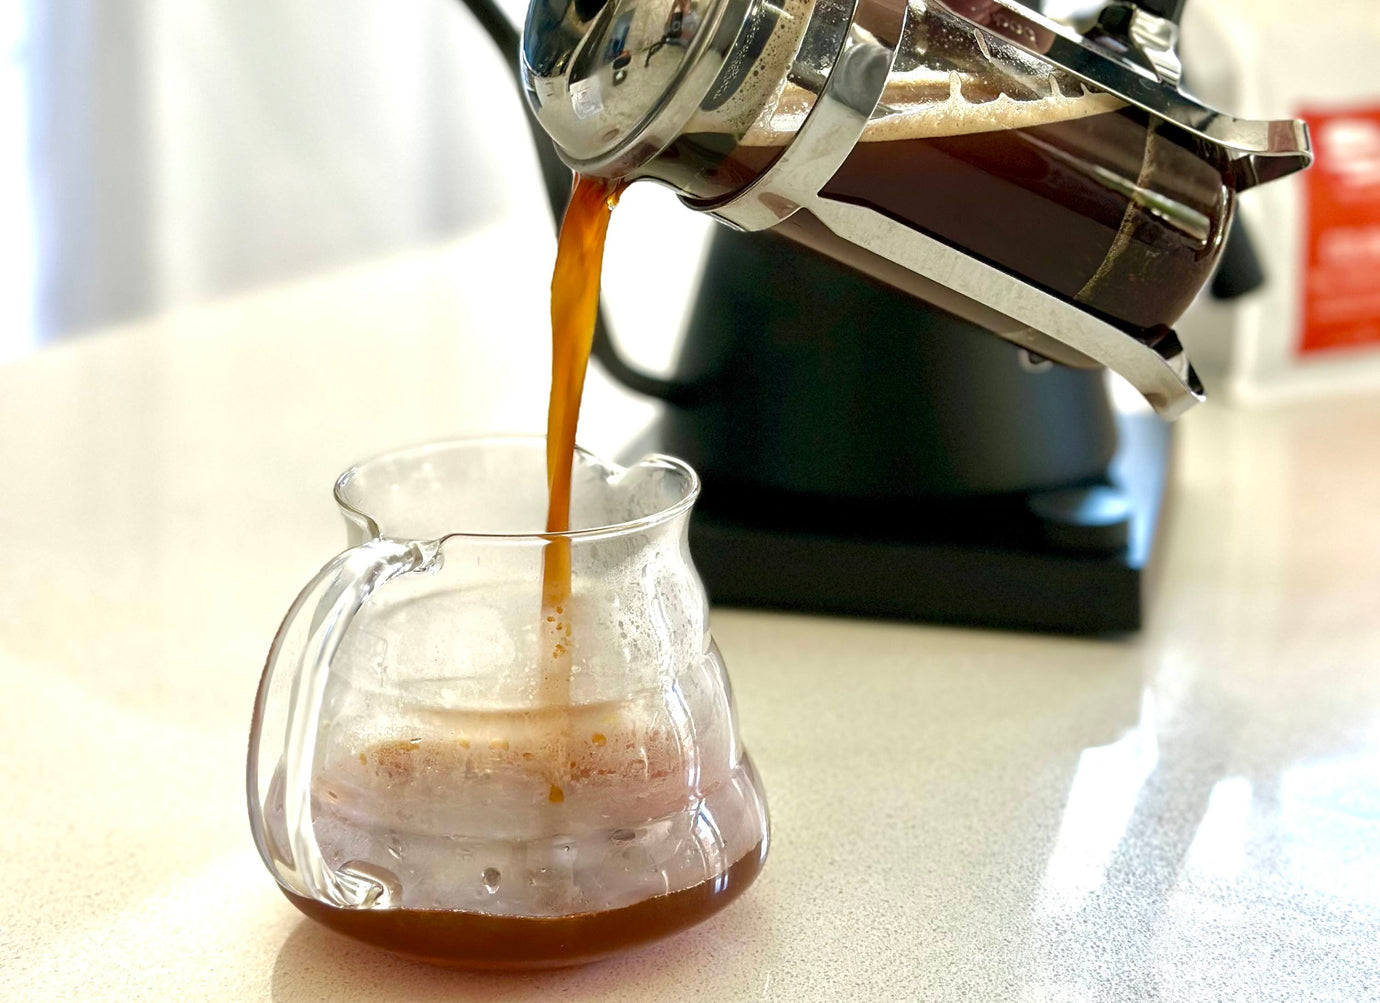 An easy and consistent technique for making reliably delicious coffee with a cafetière